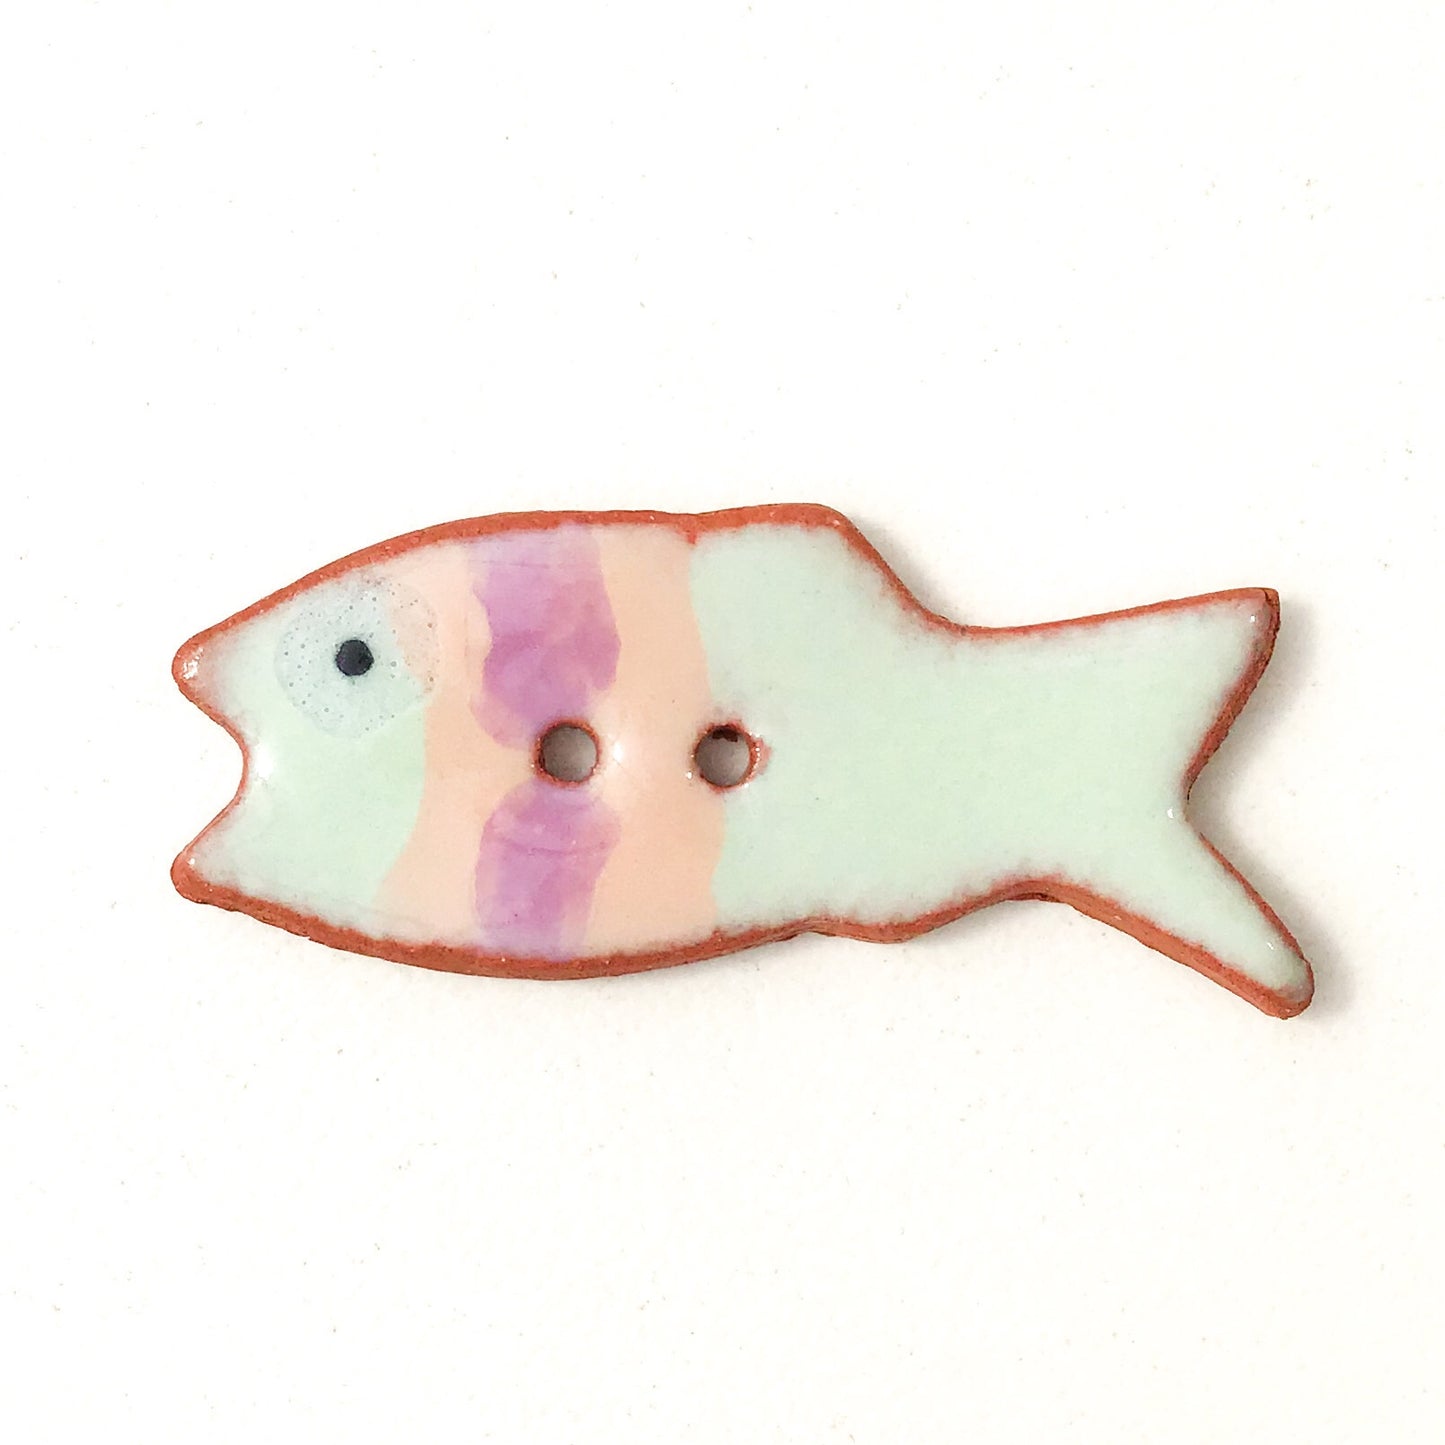 Colorful Fish Ceramic Buttons - Clay Fish Buttons - 1/2" x 1 1/4"